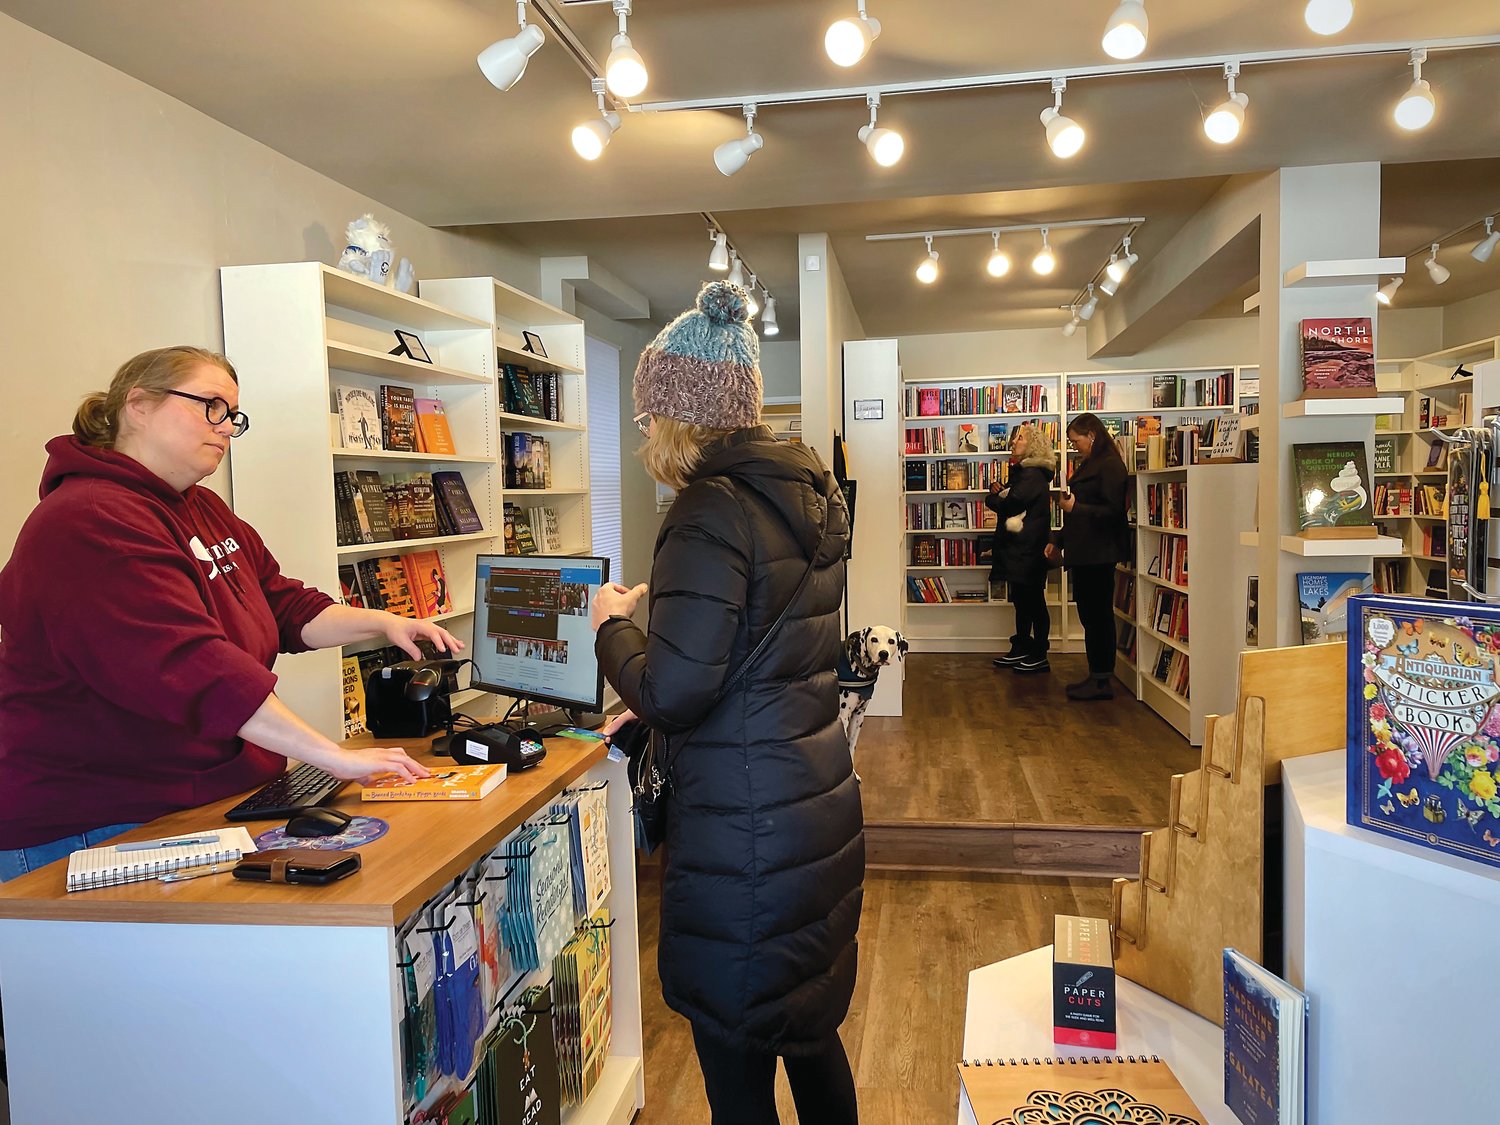 Victoria Ford, proprietor of the new Comma Bookshop in Linden Hills, consults with a customer. (Photo by Susan Schaefer)